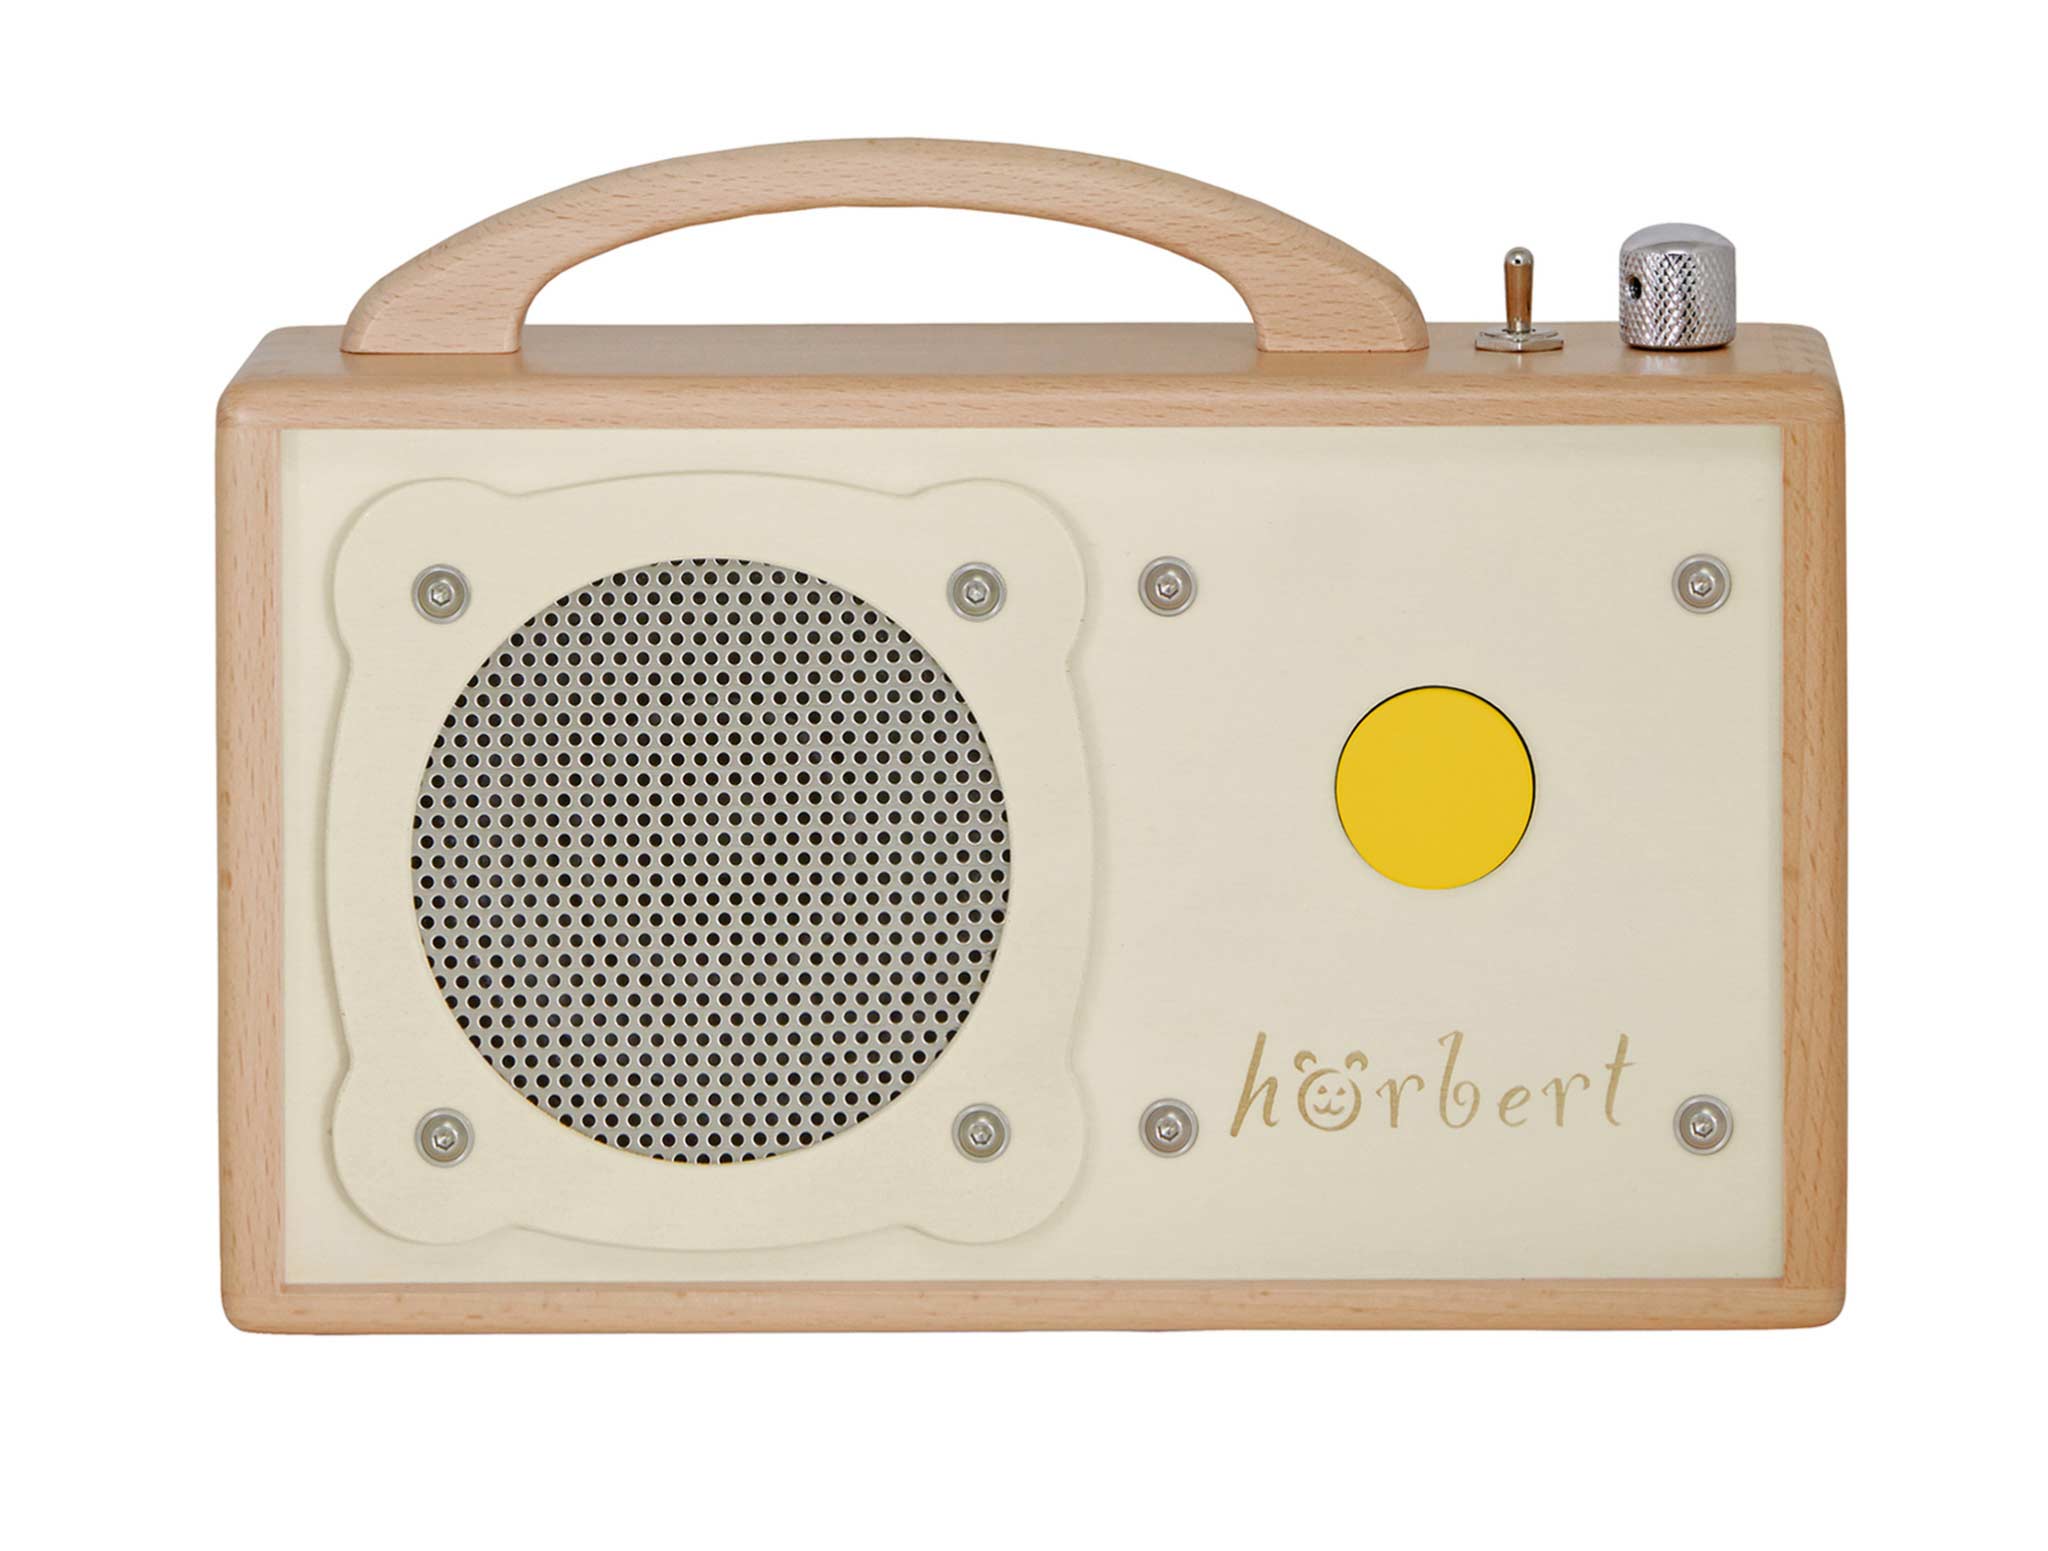 hörbert for people with disabilities. Accessible audio player and MP3 player